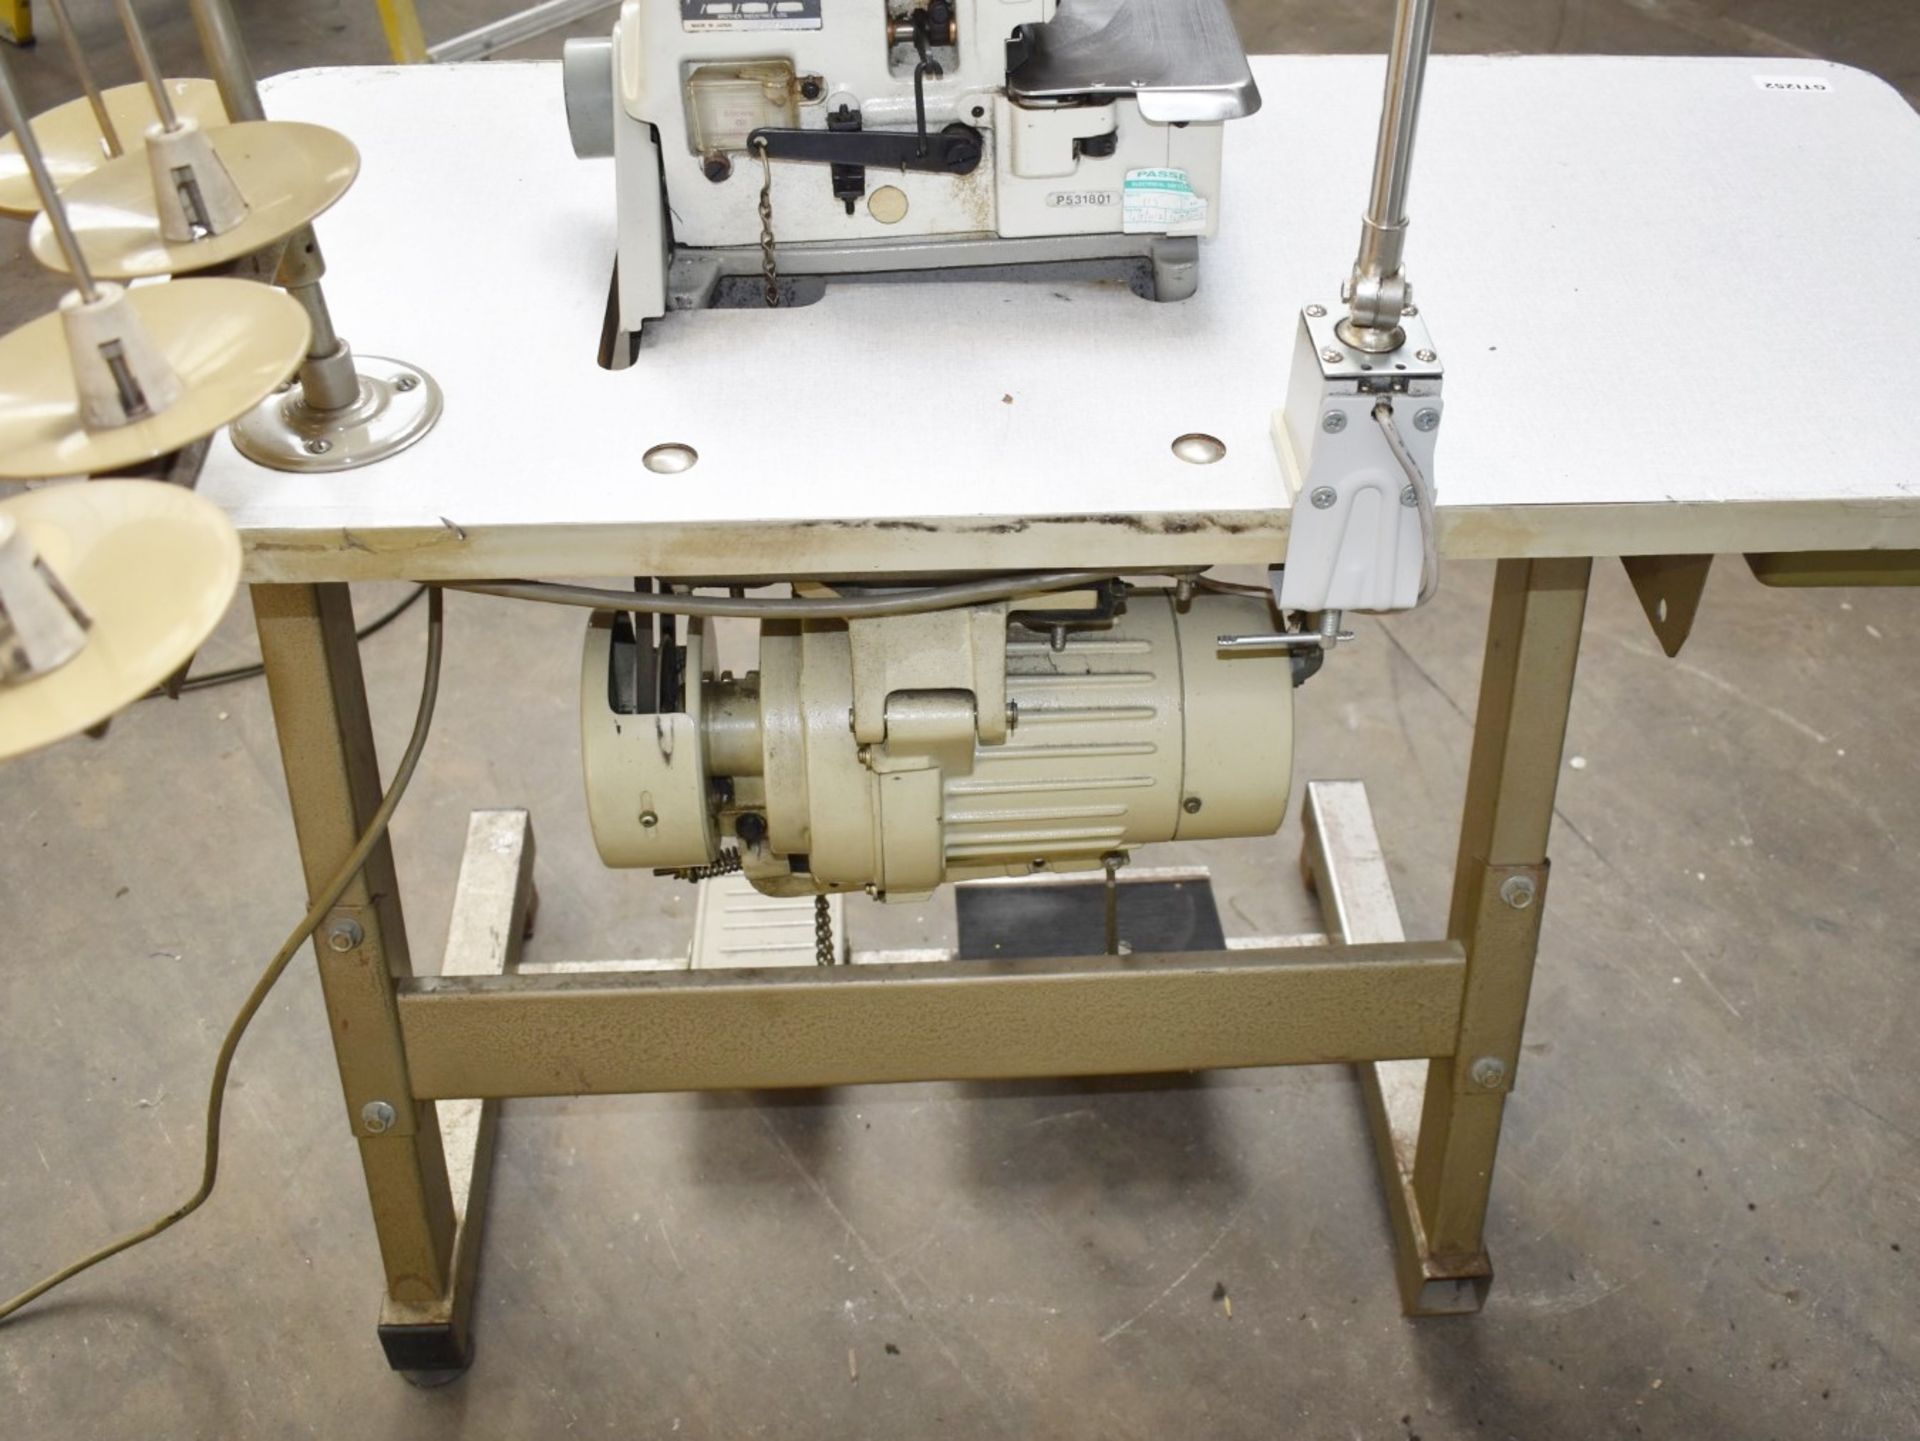 1 x Brother Overlock Industrial Sewing Machine - Model EF4-B531 - Image 21 of 27